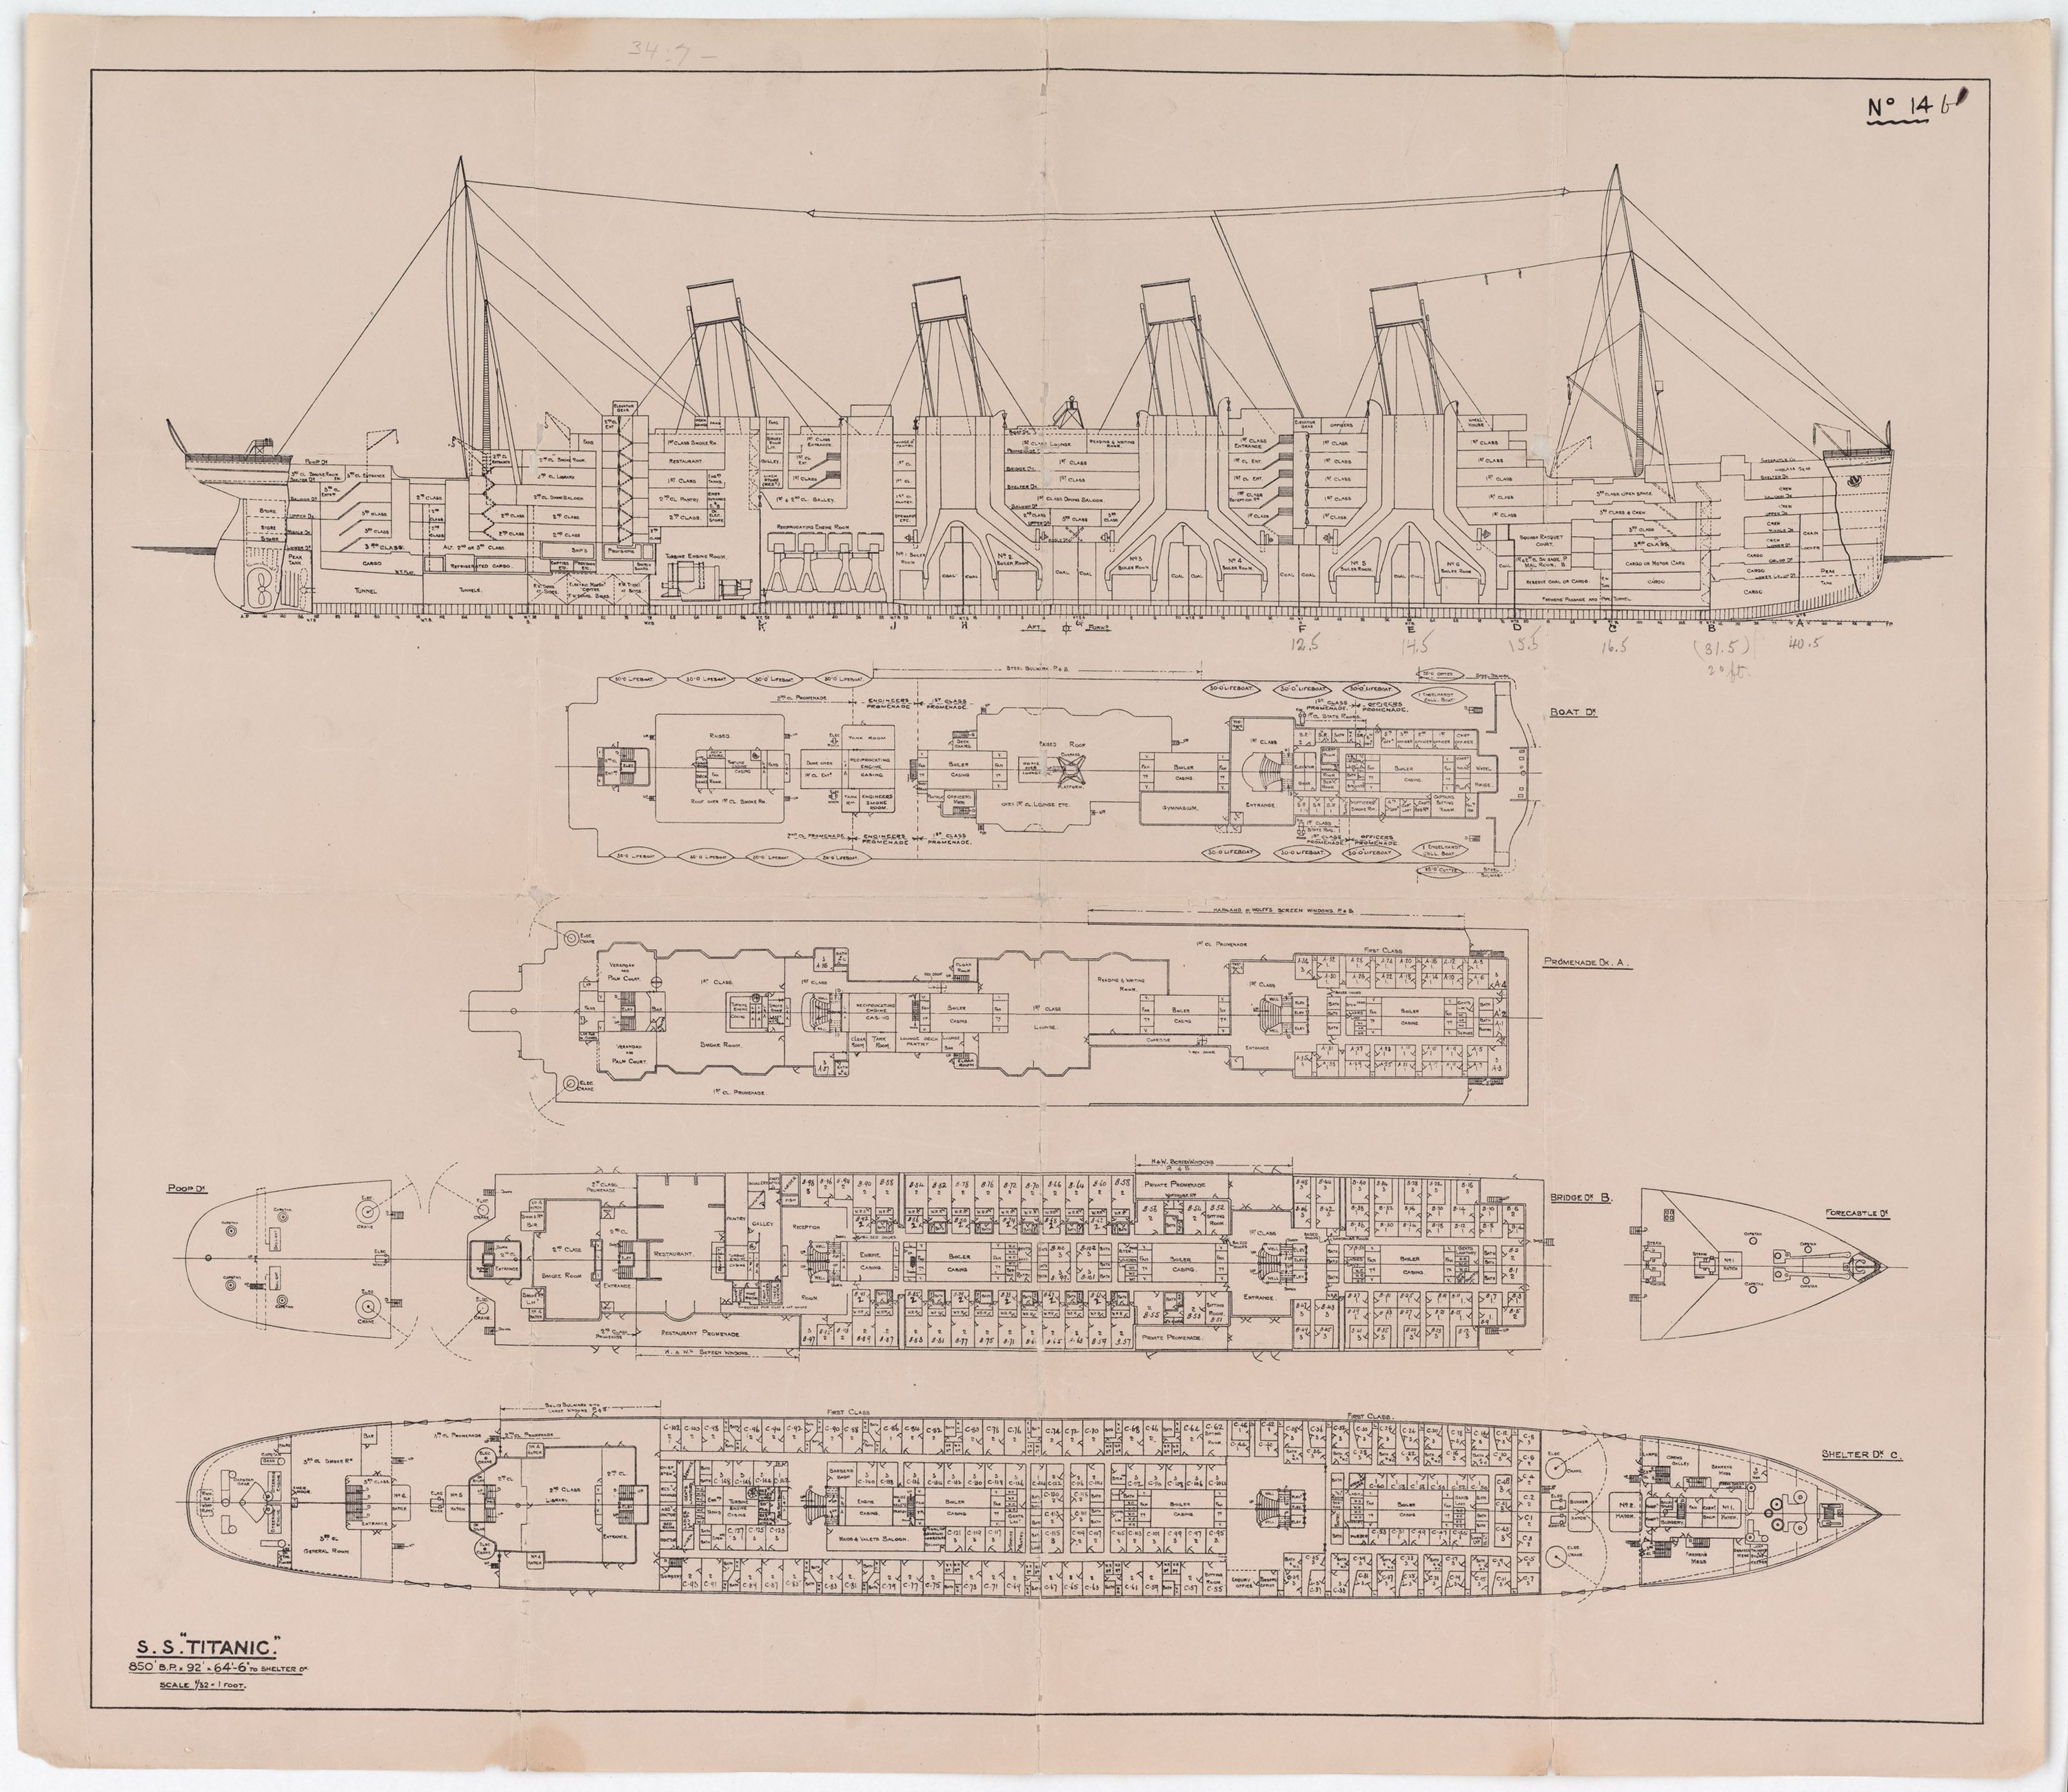 Profiles of the Titanic and its decks